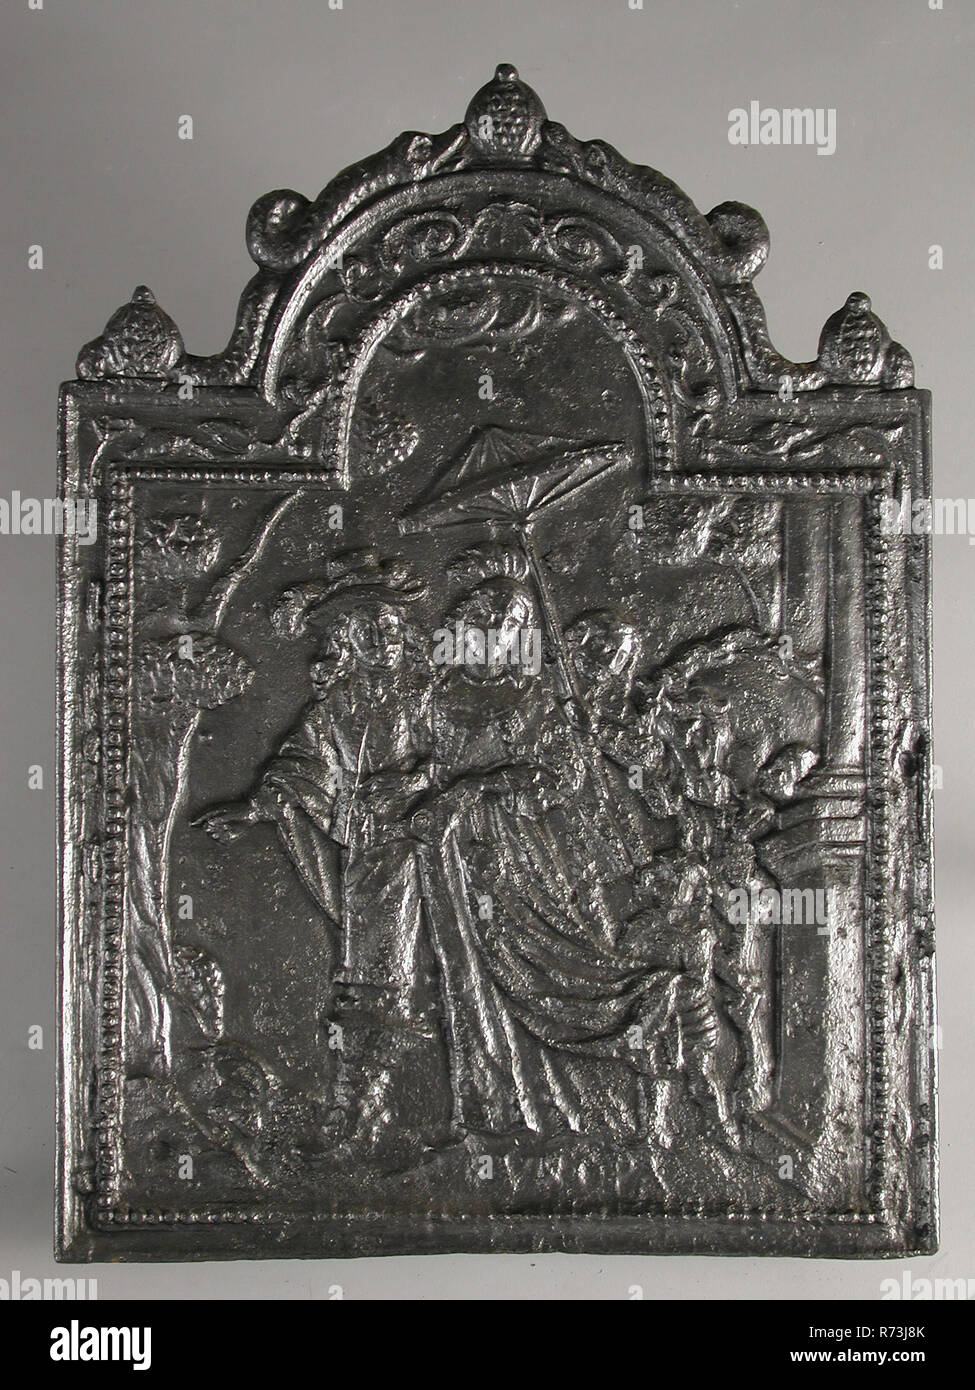 Fireback couple with two children, text Europe, fire place, Rectangular with arch at the top. On top of pomegranate flanked by two dolphins Wide border between frame and pearl necklace in which leaf decoration In the middle image of man and woman in 17th century clothing by column and tree The woman has fan in the left hand. Two servants: one holds the man's cloak and the other holds the parasol over the woman's head. On the side horse with float At the bottom: EUROPA living environment interior heating Occident culture difference Europe Stock Photo